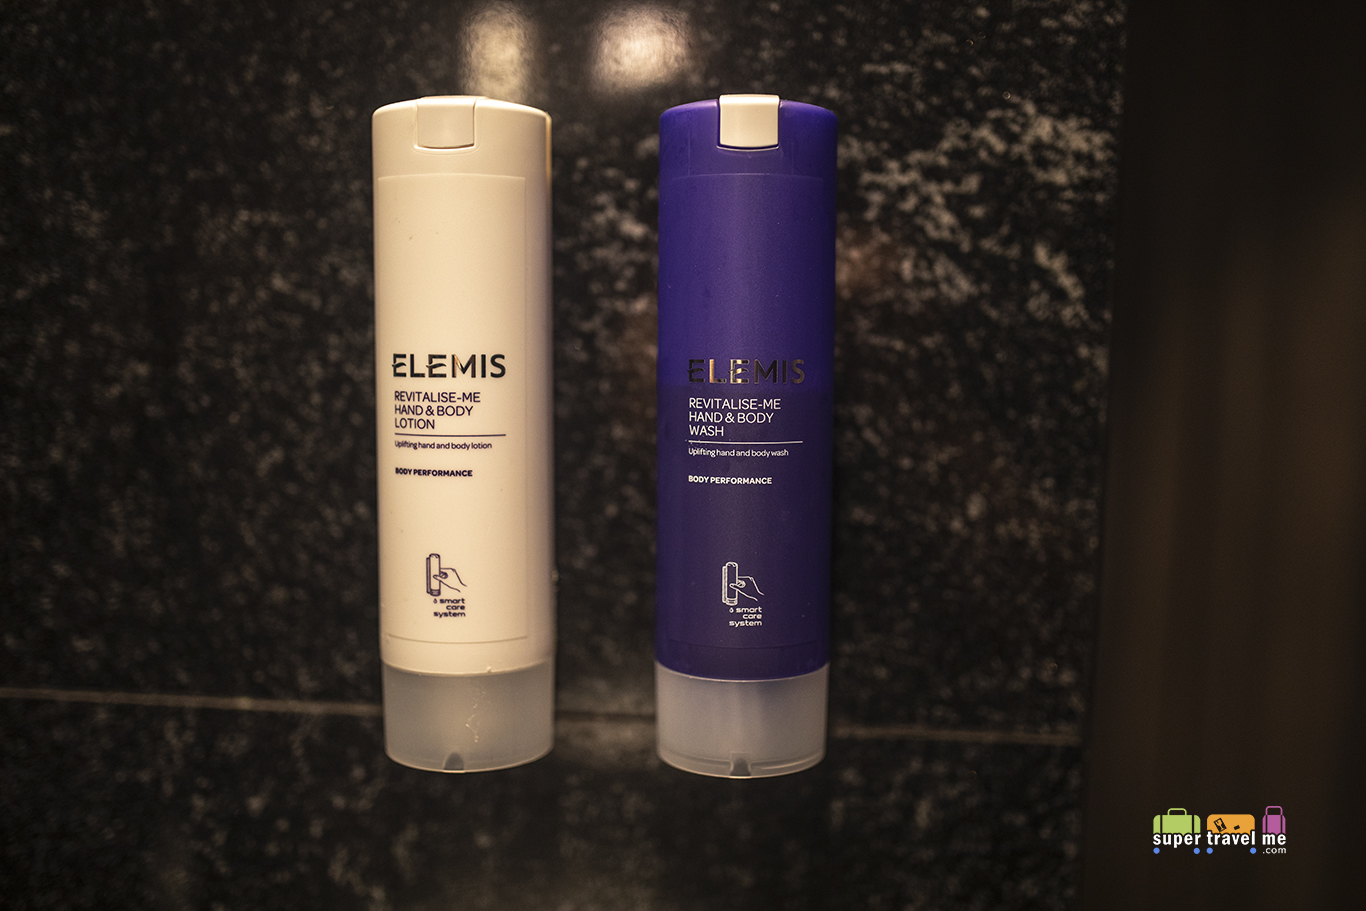 Elemis shower products at Plaza Premium First in Hong Kong